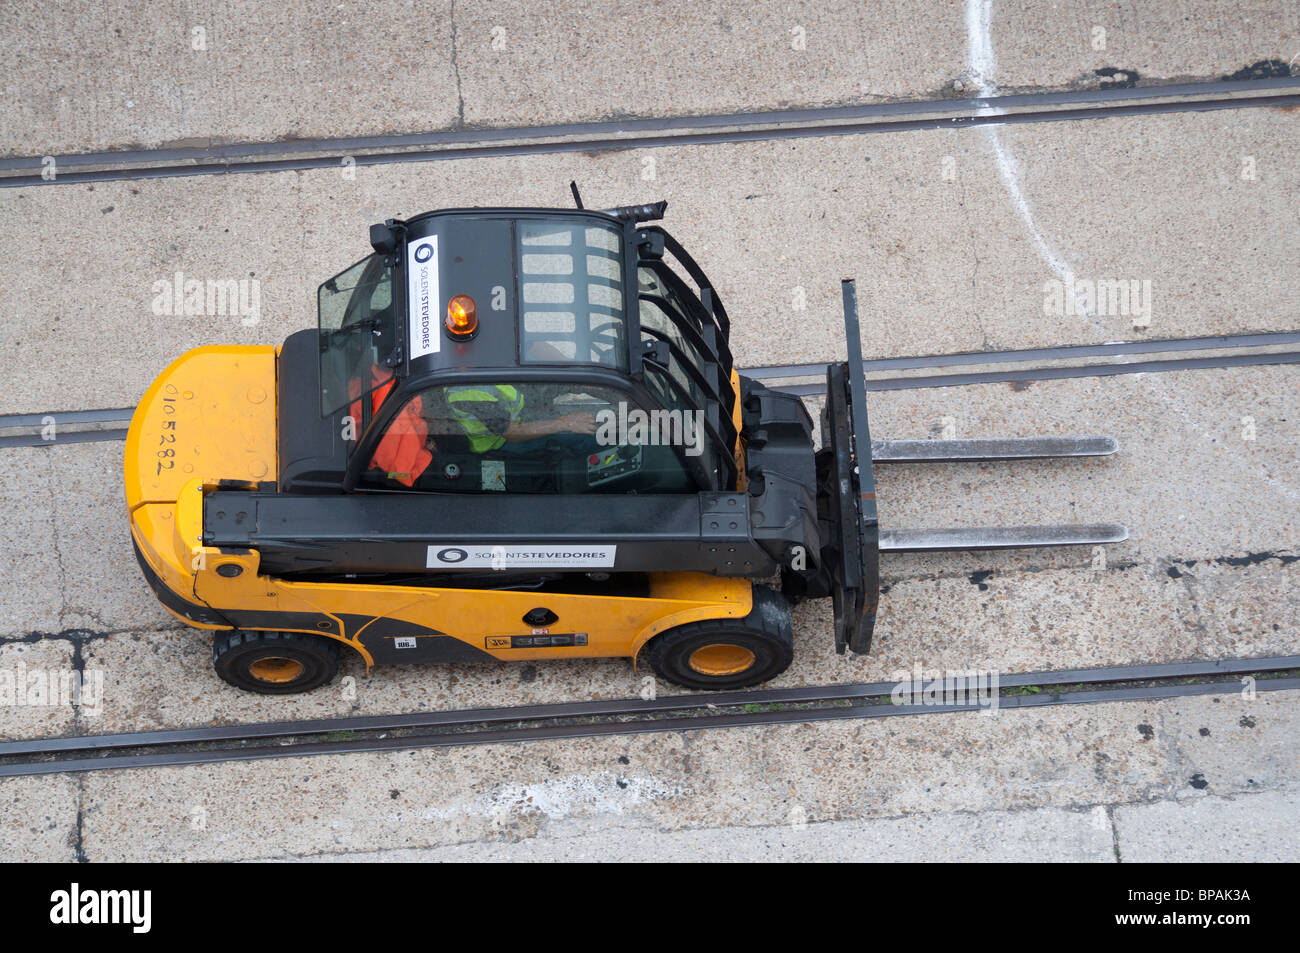 A fork lift truck preparing to move boxes of food or drink in Southampton, England. Stock Photo